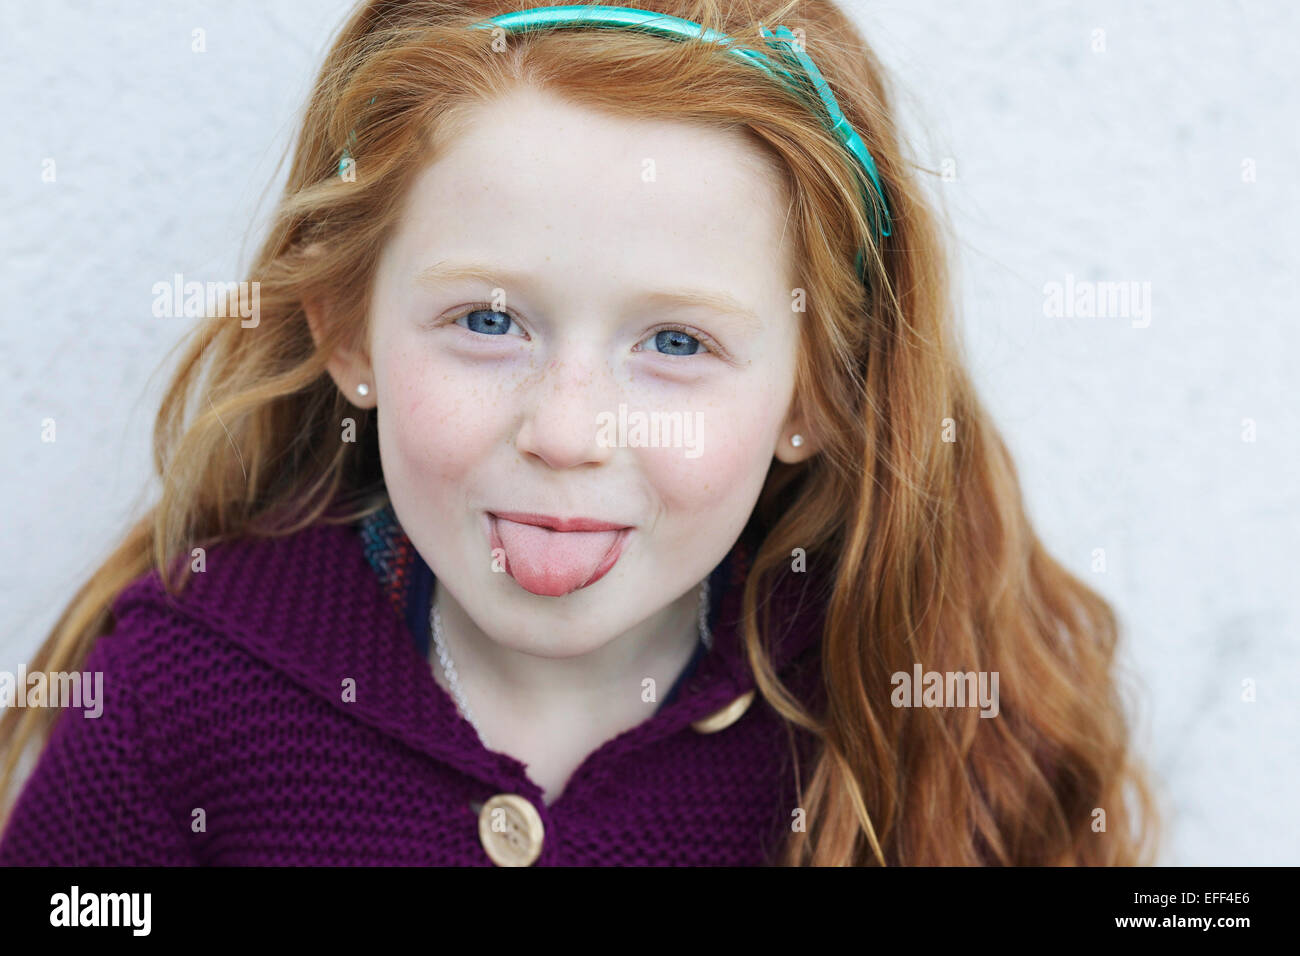 Young Girl With Red Hair Sticking Out Tongue Stock Photo 78394126